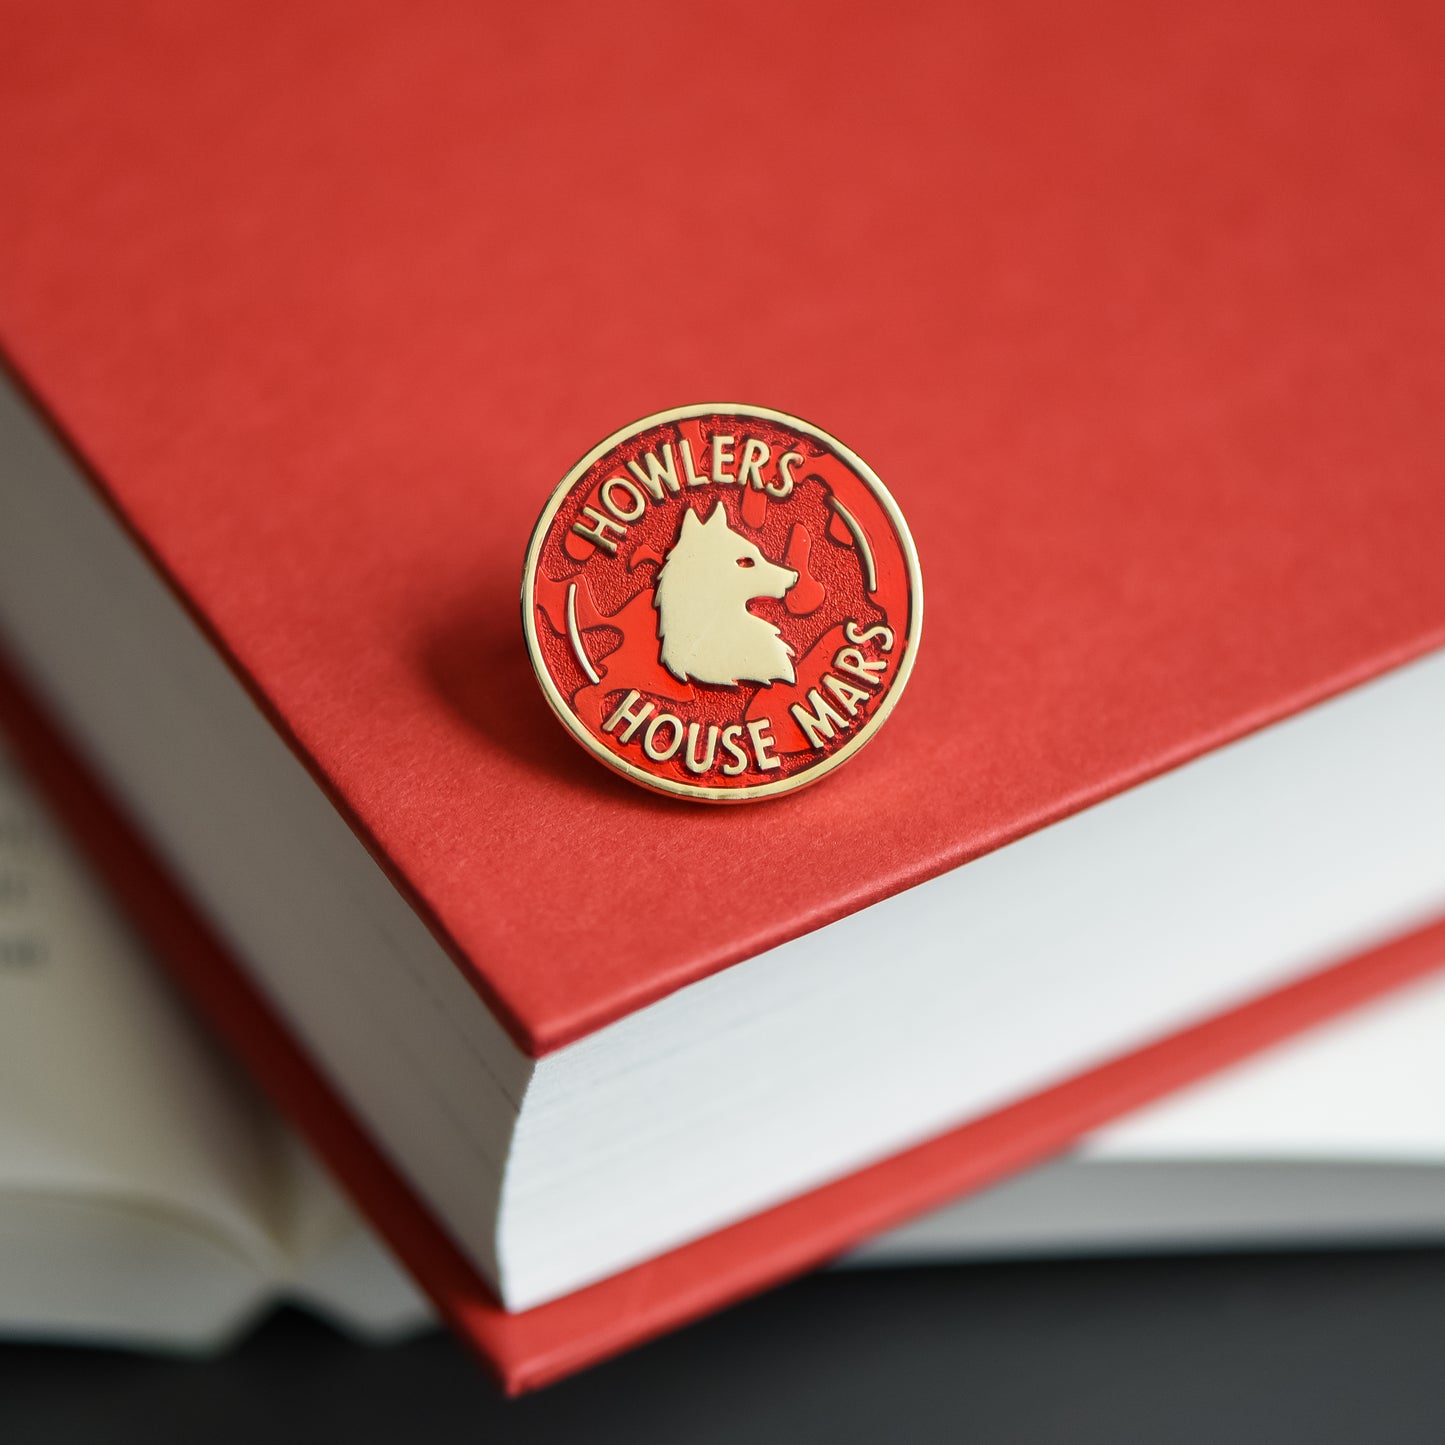 Red and gold circle membership style enamel pin with a wolf and howler house mars text on a red rising book